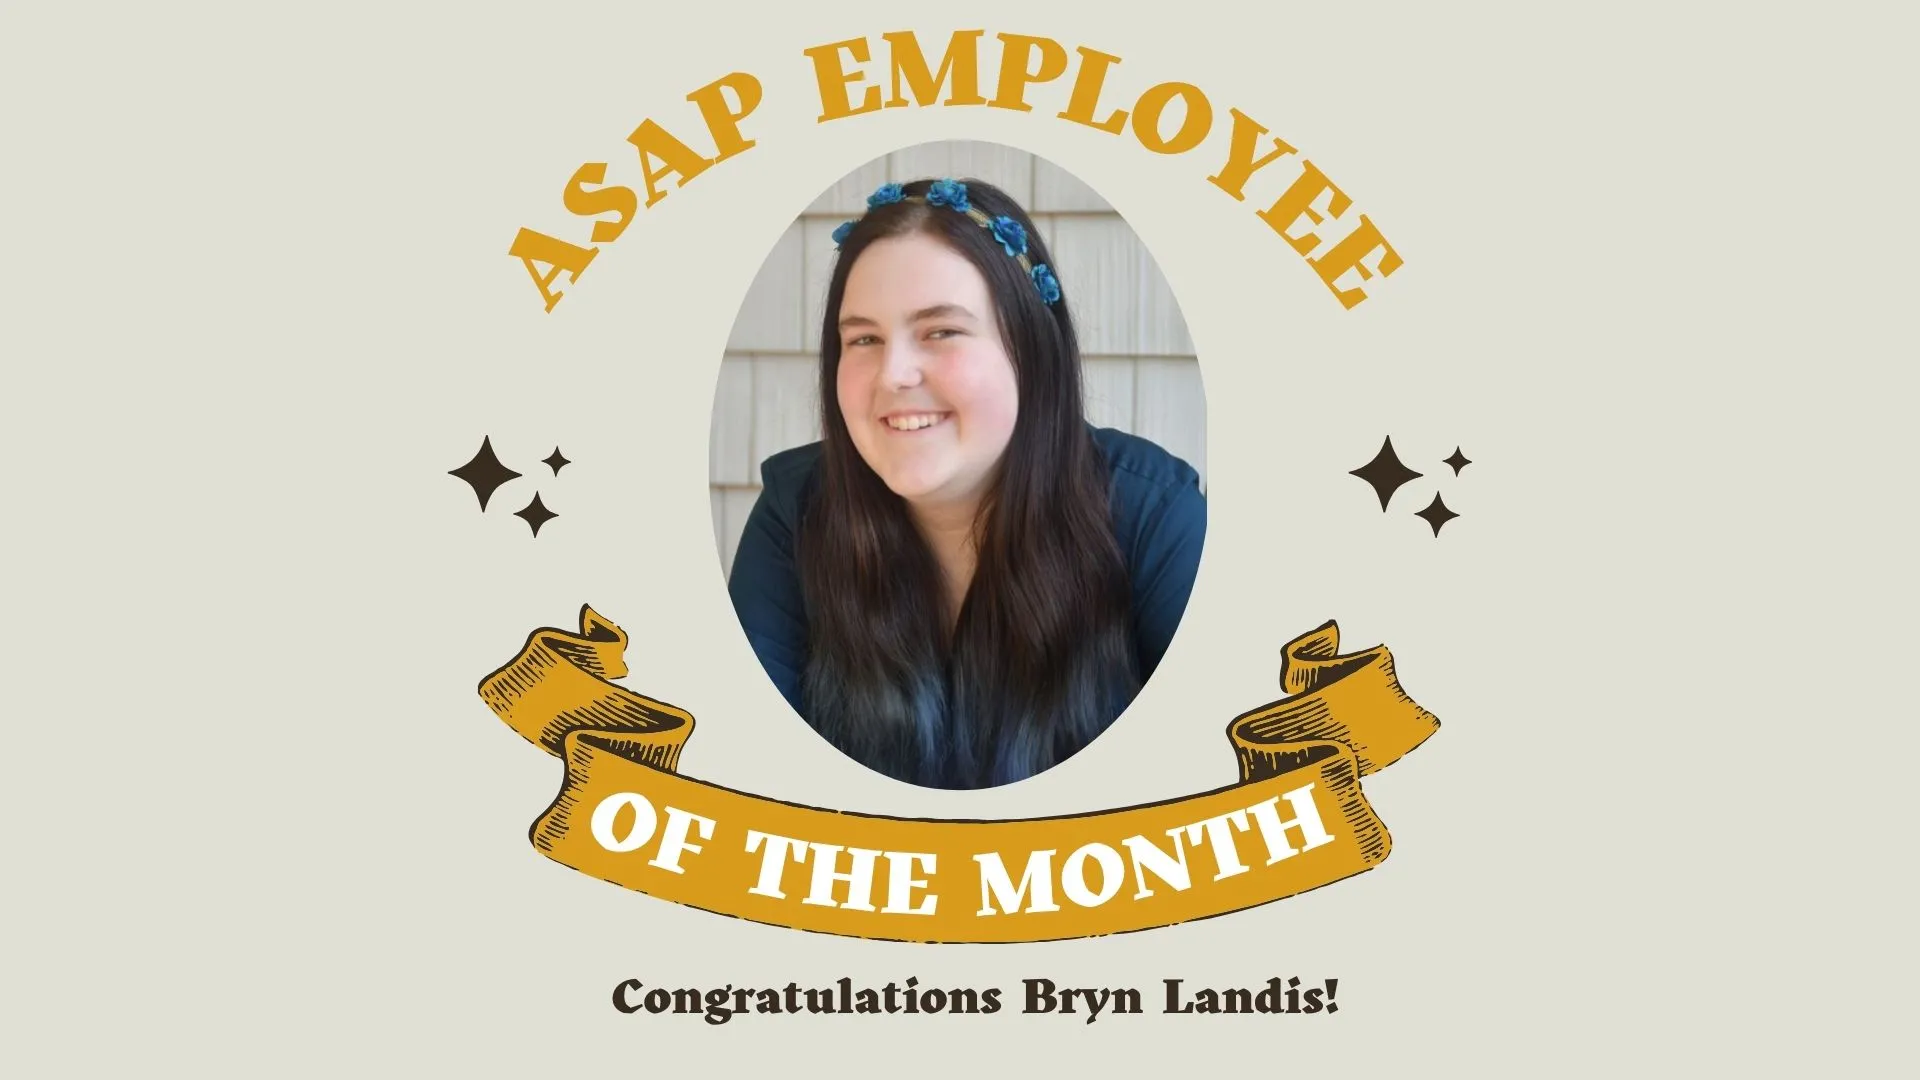 A photo of Bryn and a frame that says "ASAP Employee of the Month: Congratulations to Bryn Landis!"